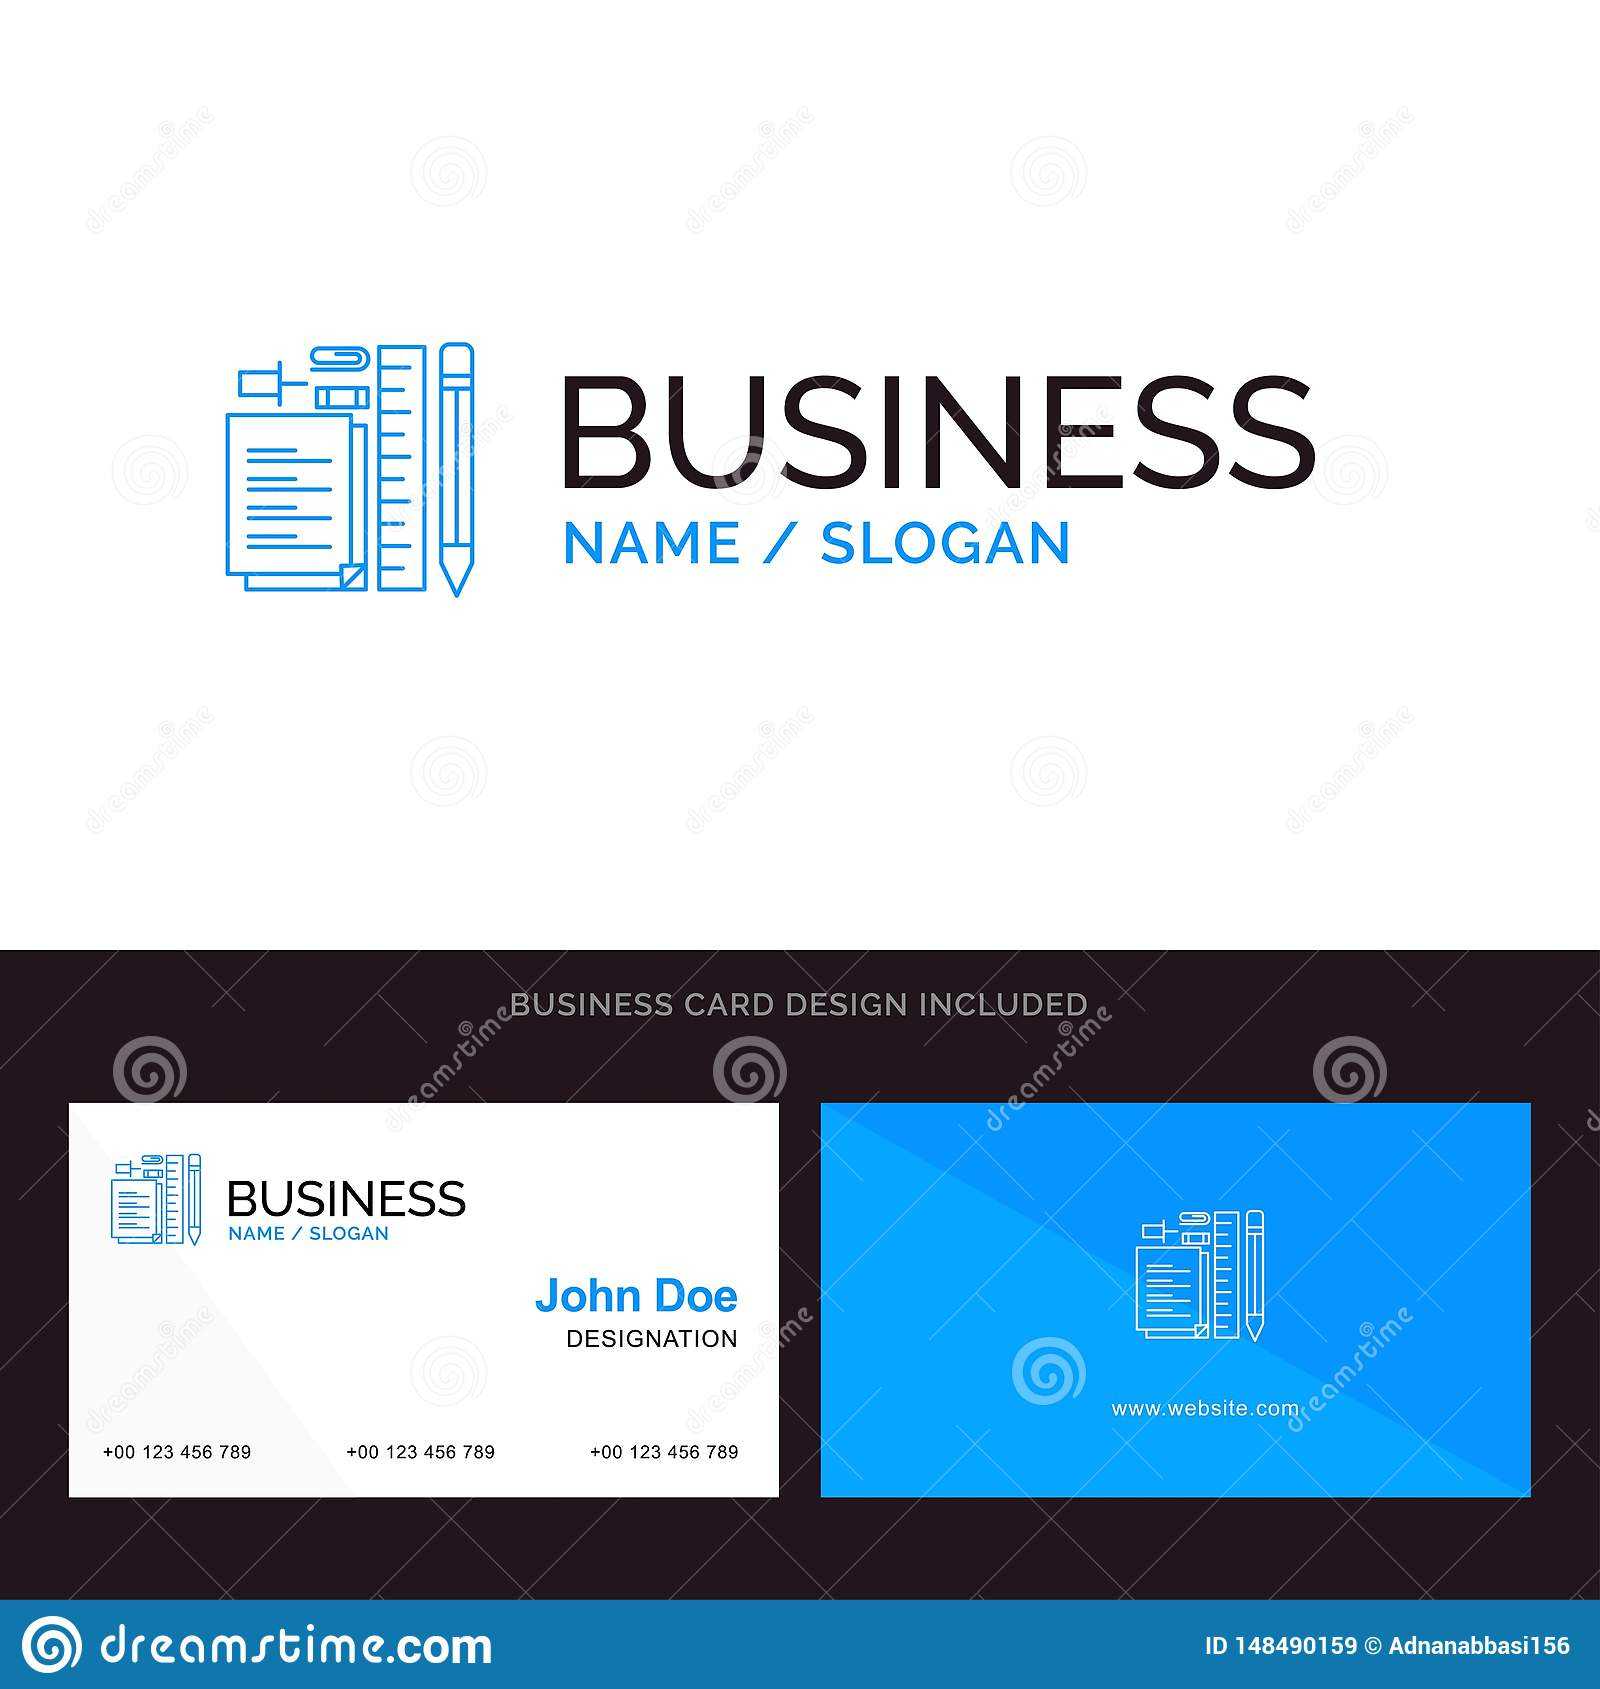 Stationary, Pencil, Pen, Notepad, Pin Blue Business Logo And Intended For Push Card Template